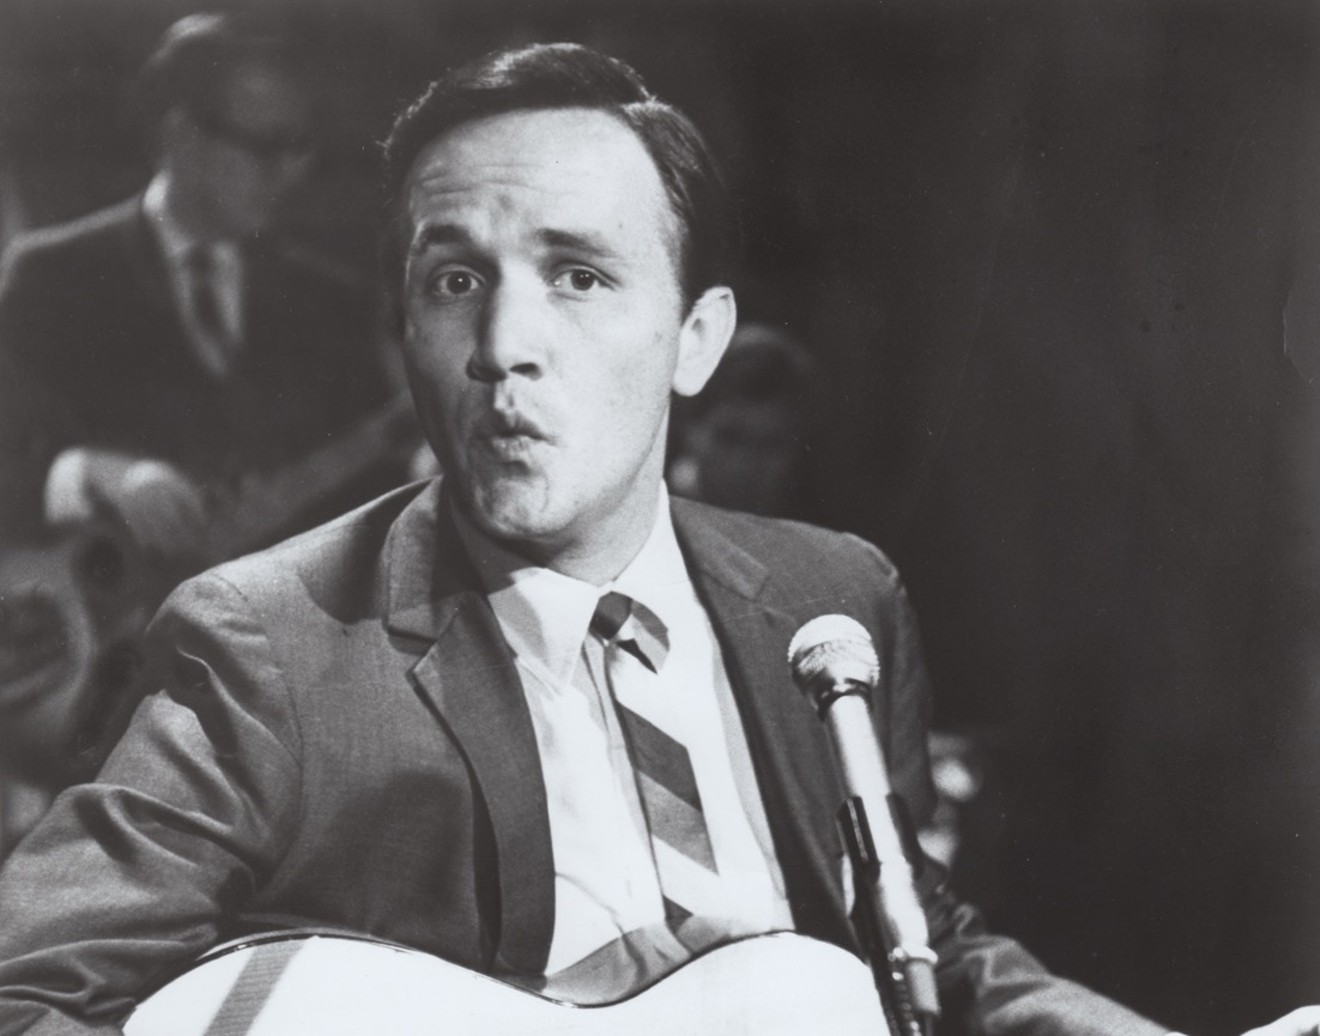 Roger Miller combined heartache, nostalgia, and a sly, subversive sense of humor in his songs.